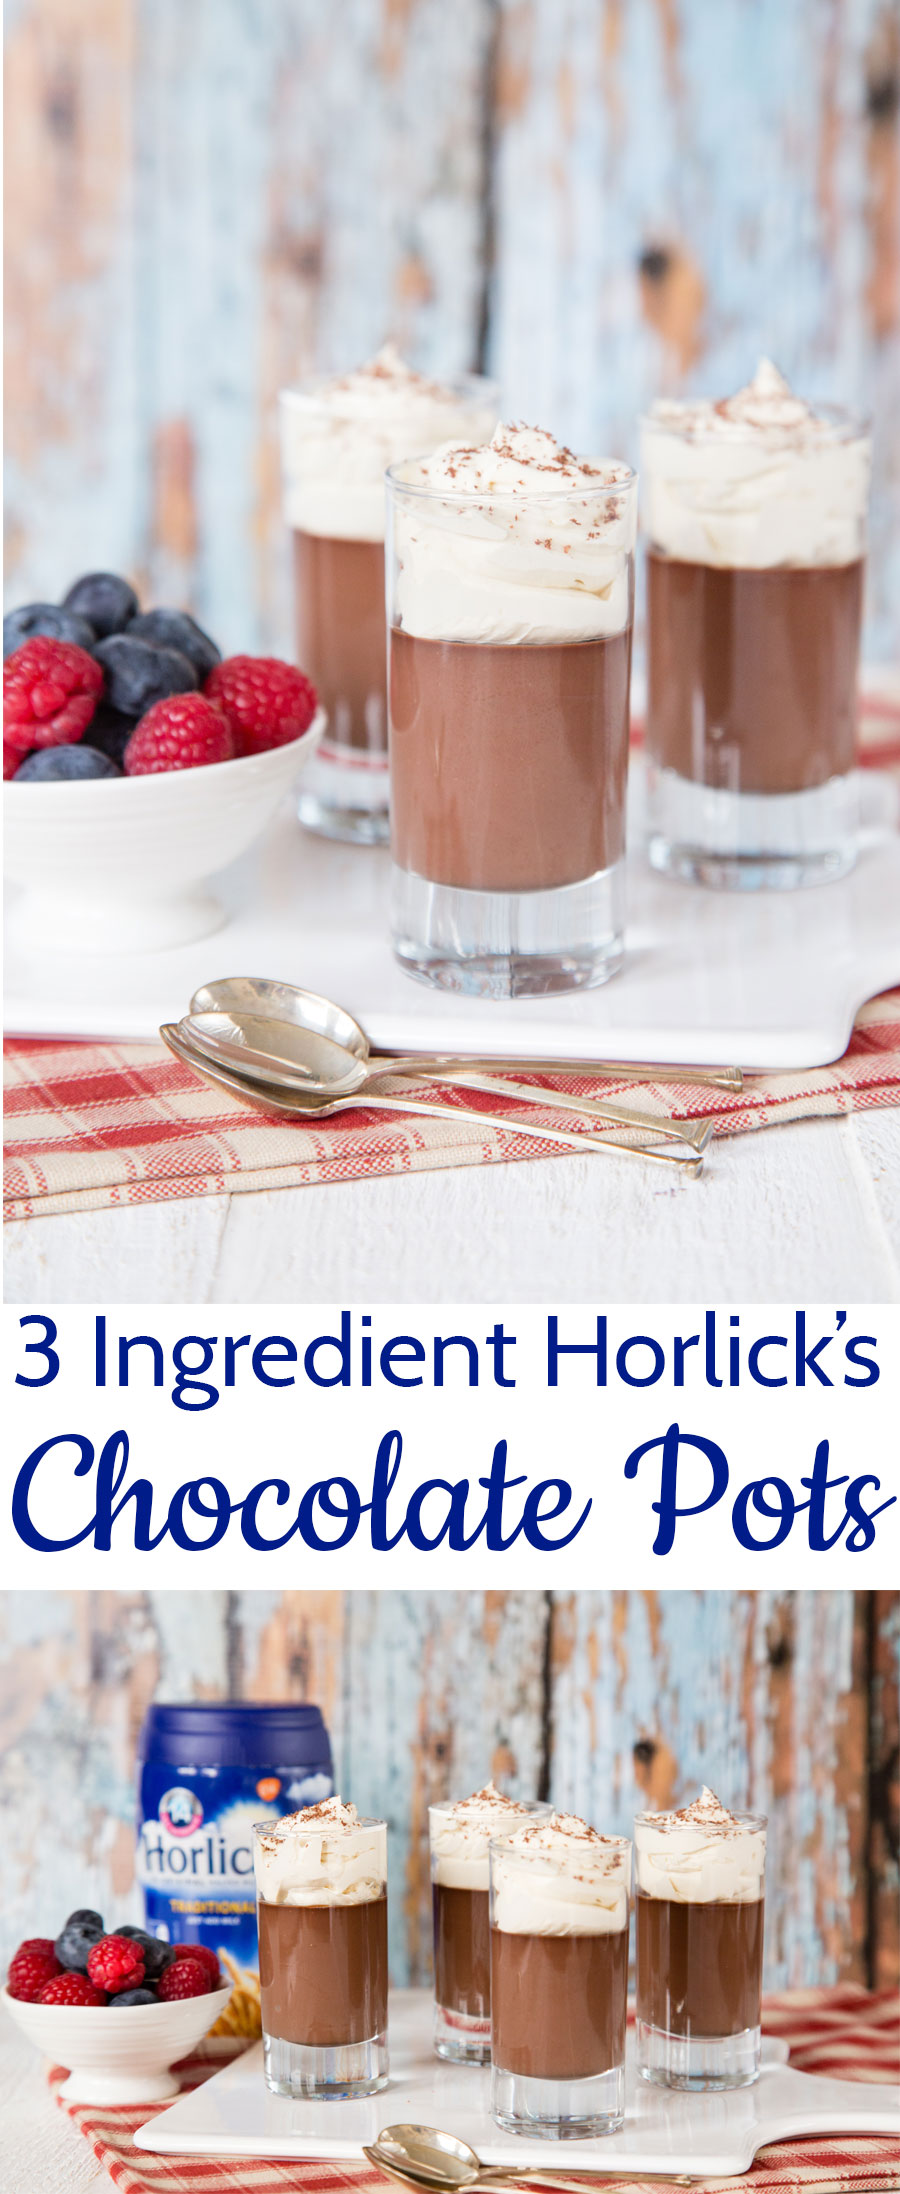 These Horlicks malted chocolate pots are decadent, but easy to make dessert with only three ingredients.